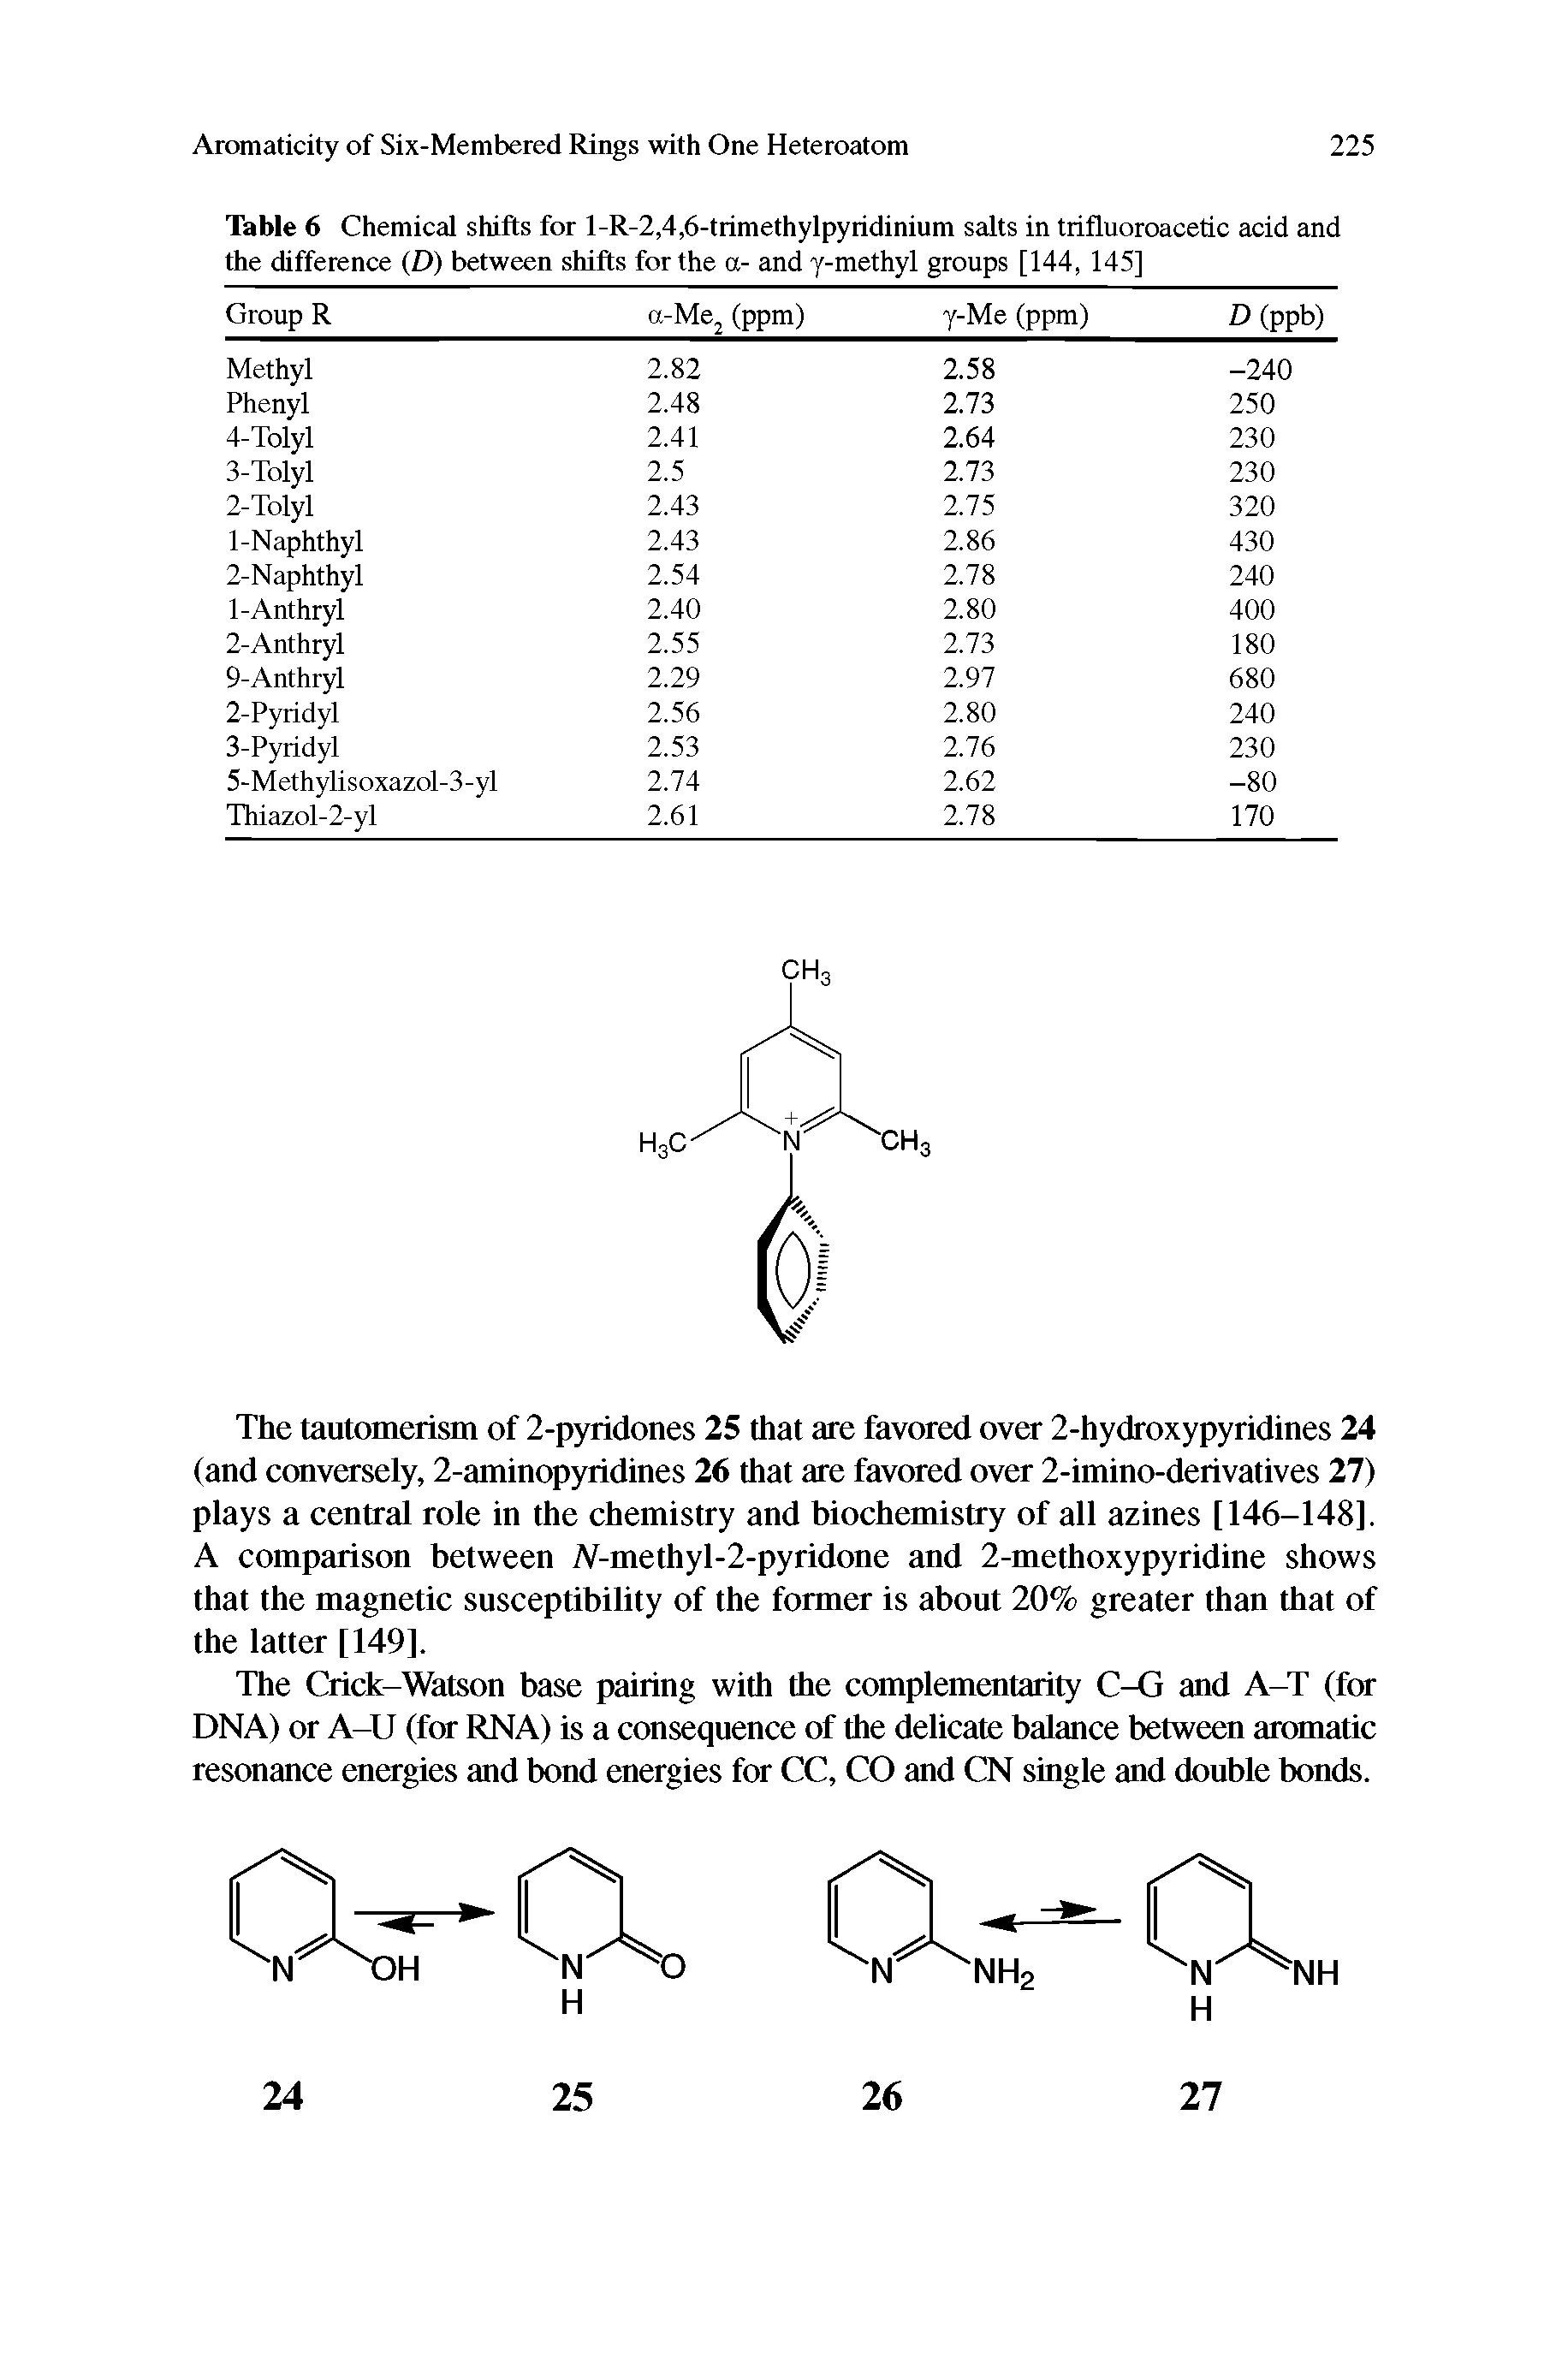 Table 6 Chemical shifts for l-R-2,4,6-trimethylpyridinium salts in trifluoroacetic acid and the difference (D) between shifts for the a- and y-methyl groups [144, 145]...